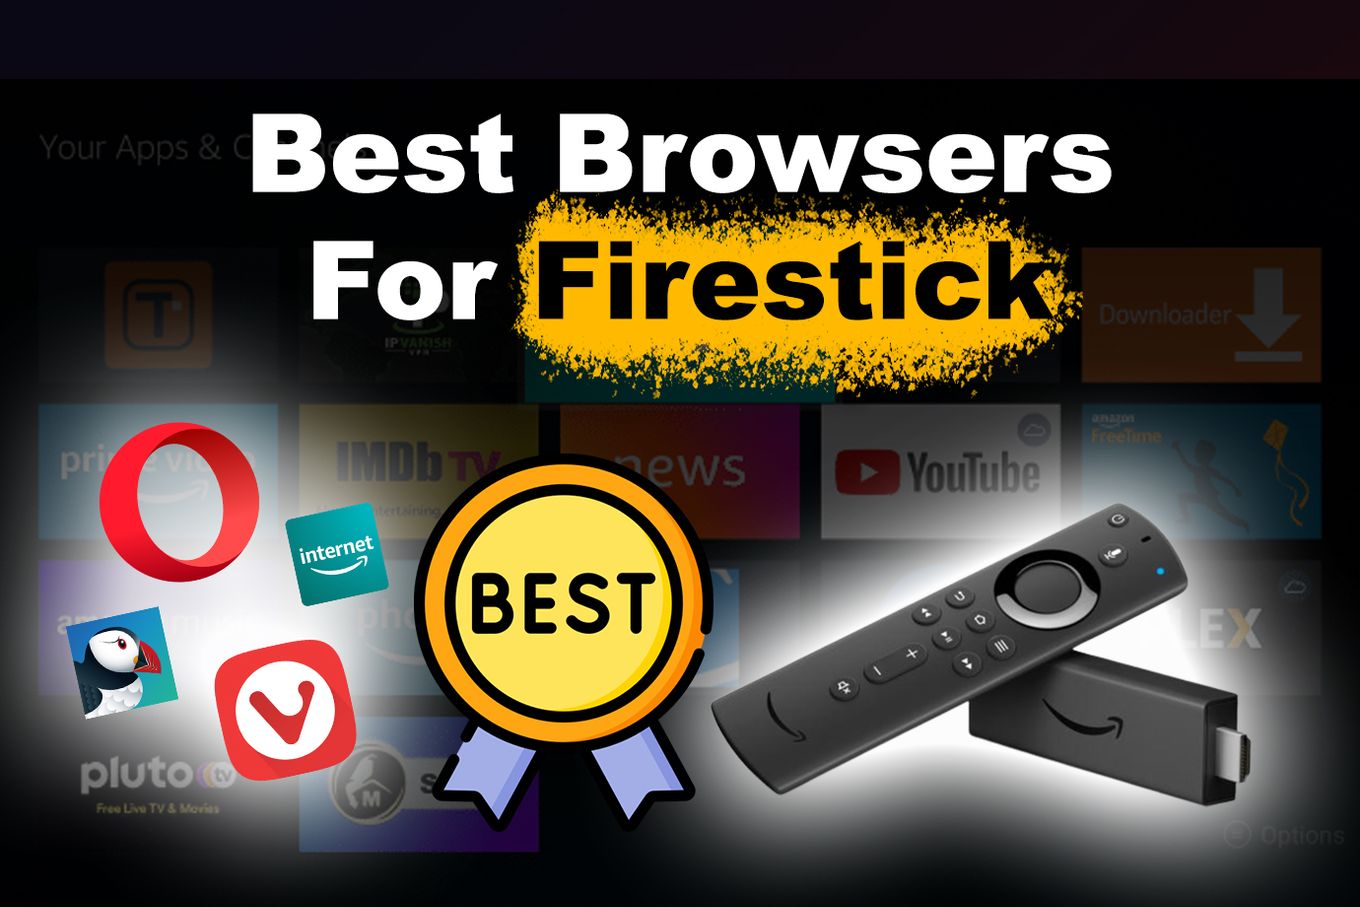 List of Best Browsers For Firestick